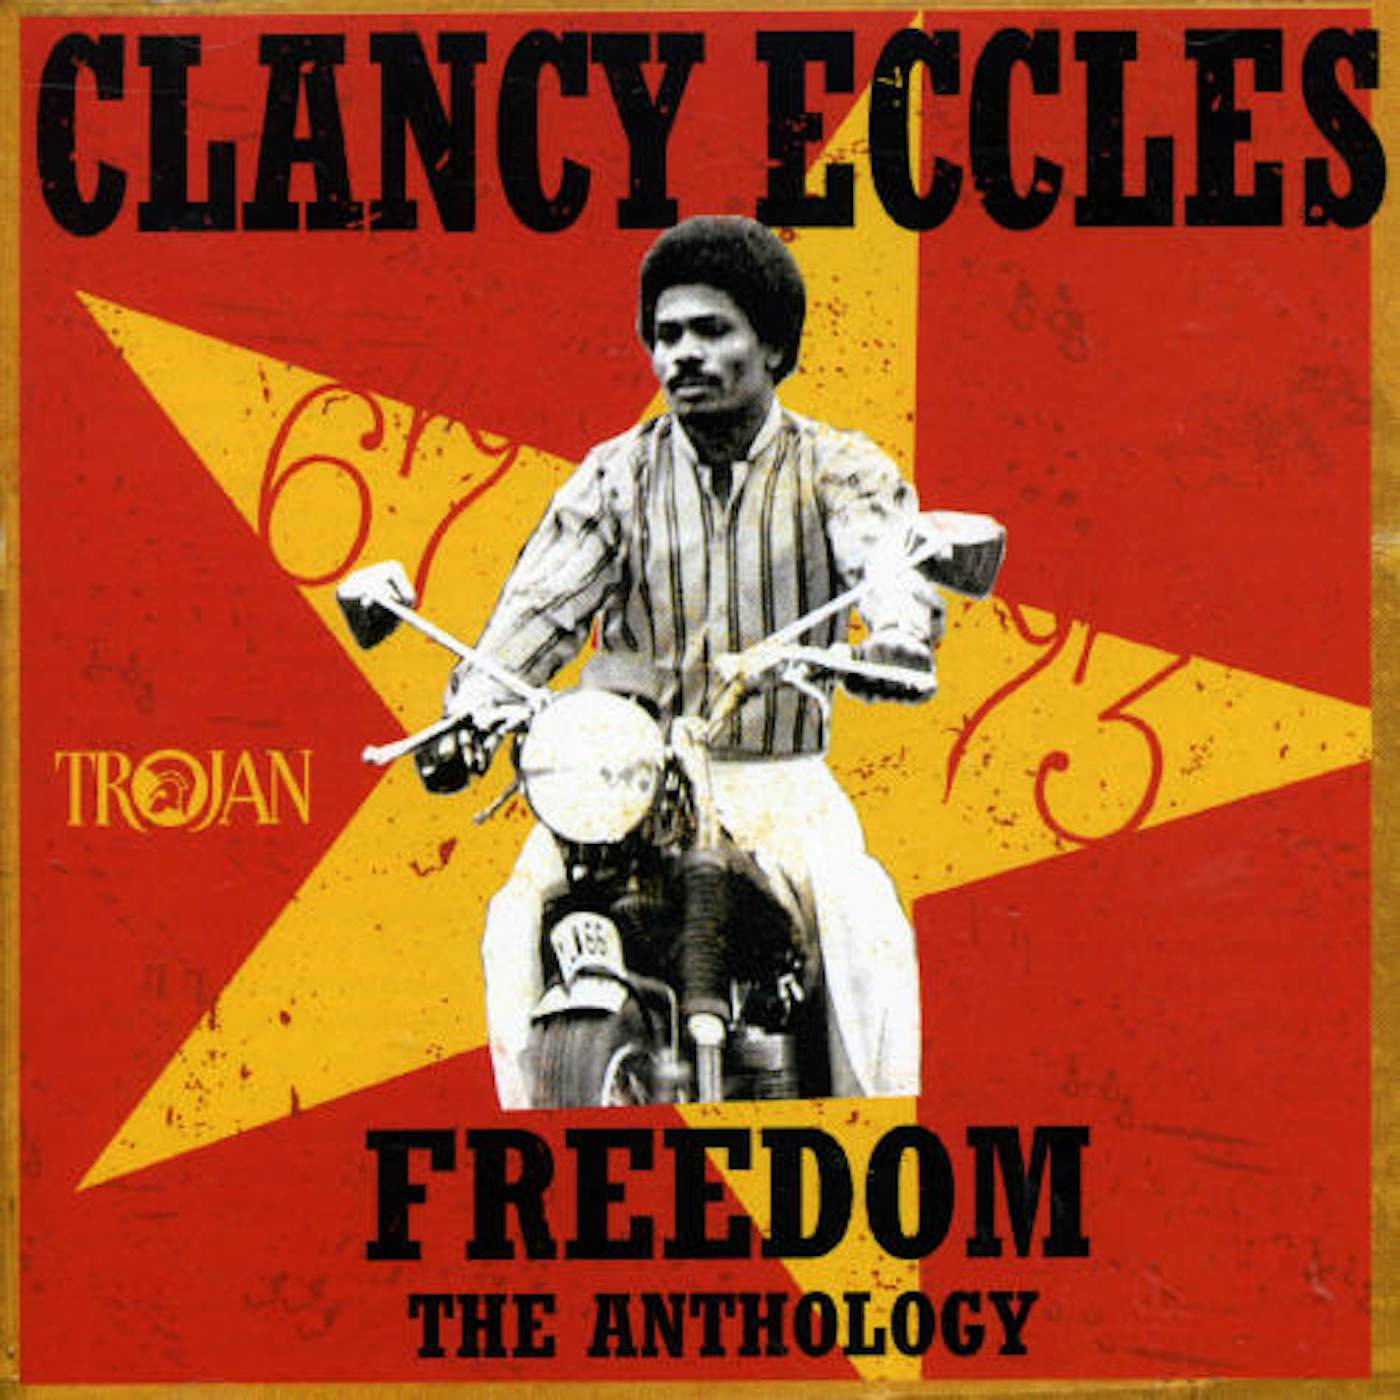 Clancy Eccles FREEDOM: ANTHOLOGY 1967-1973 CD